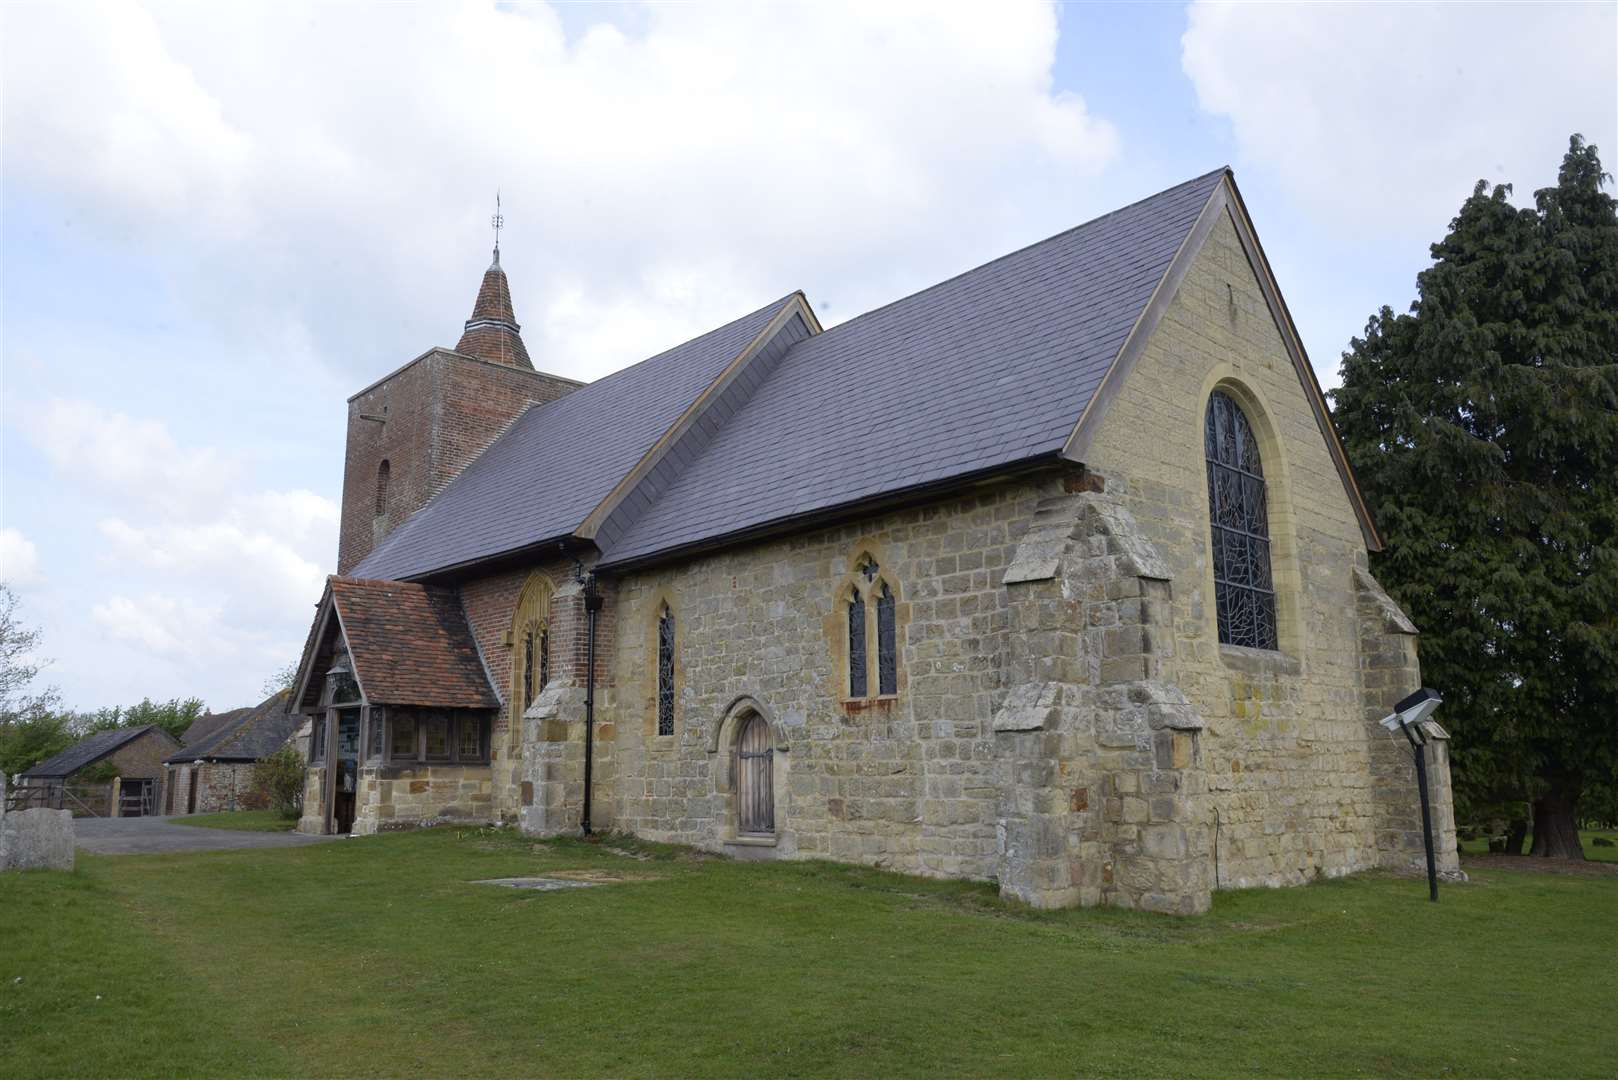 Tudeley is well known for its All Saints Church with stained glass windows designed by Marc Chagall